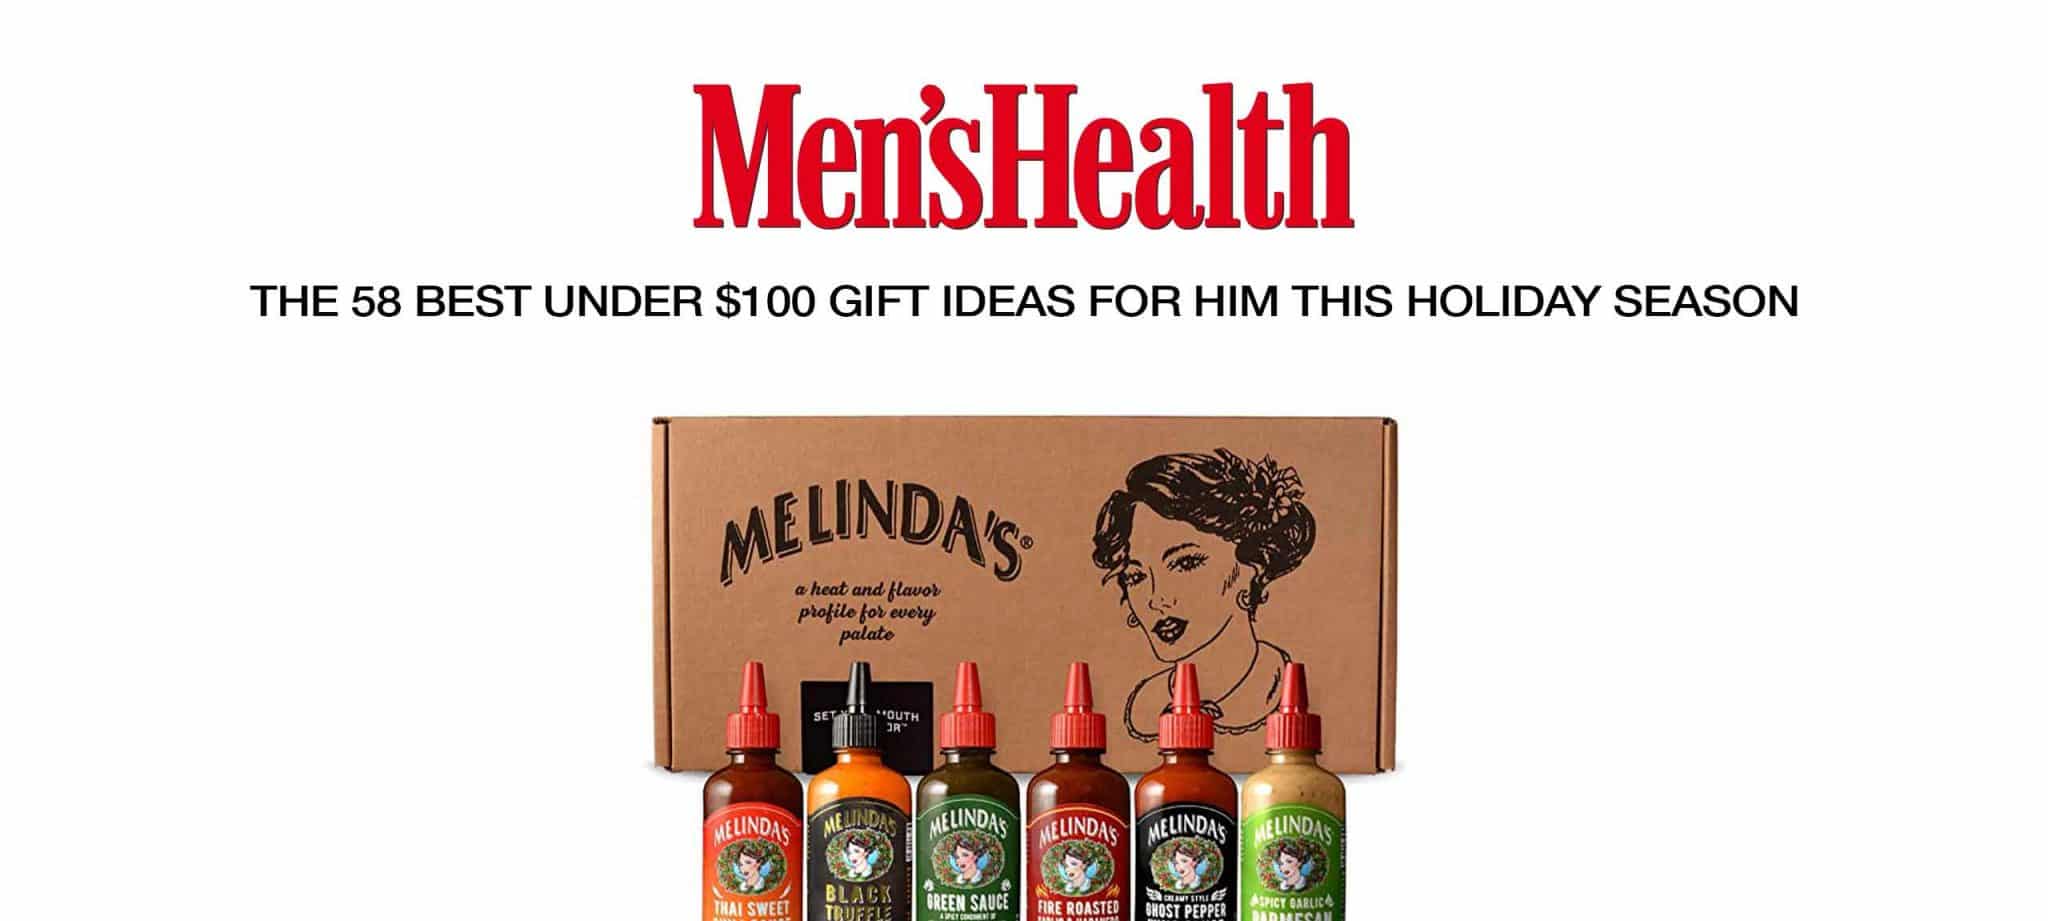 The 58 Best Under $100 Gift Ideas for Him This Holiday Season | Says Men'sHealth